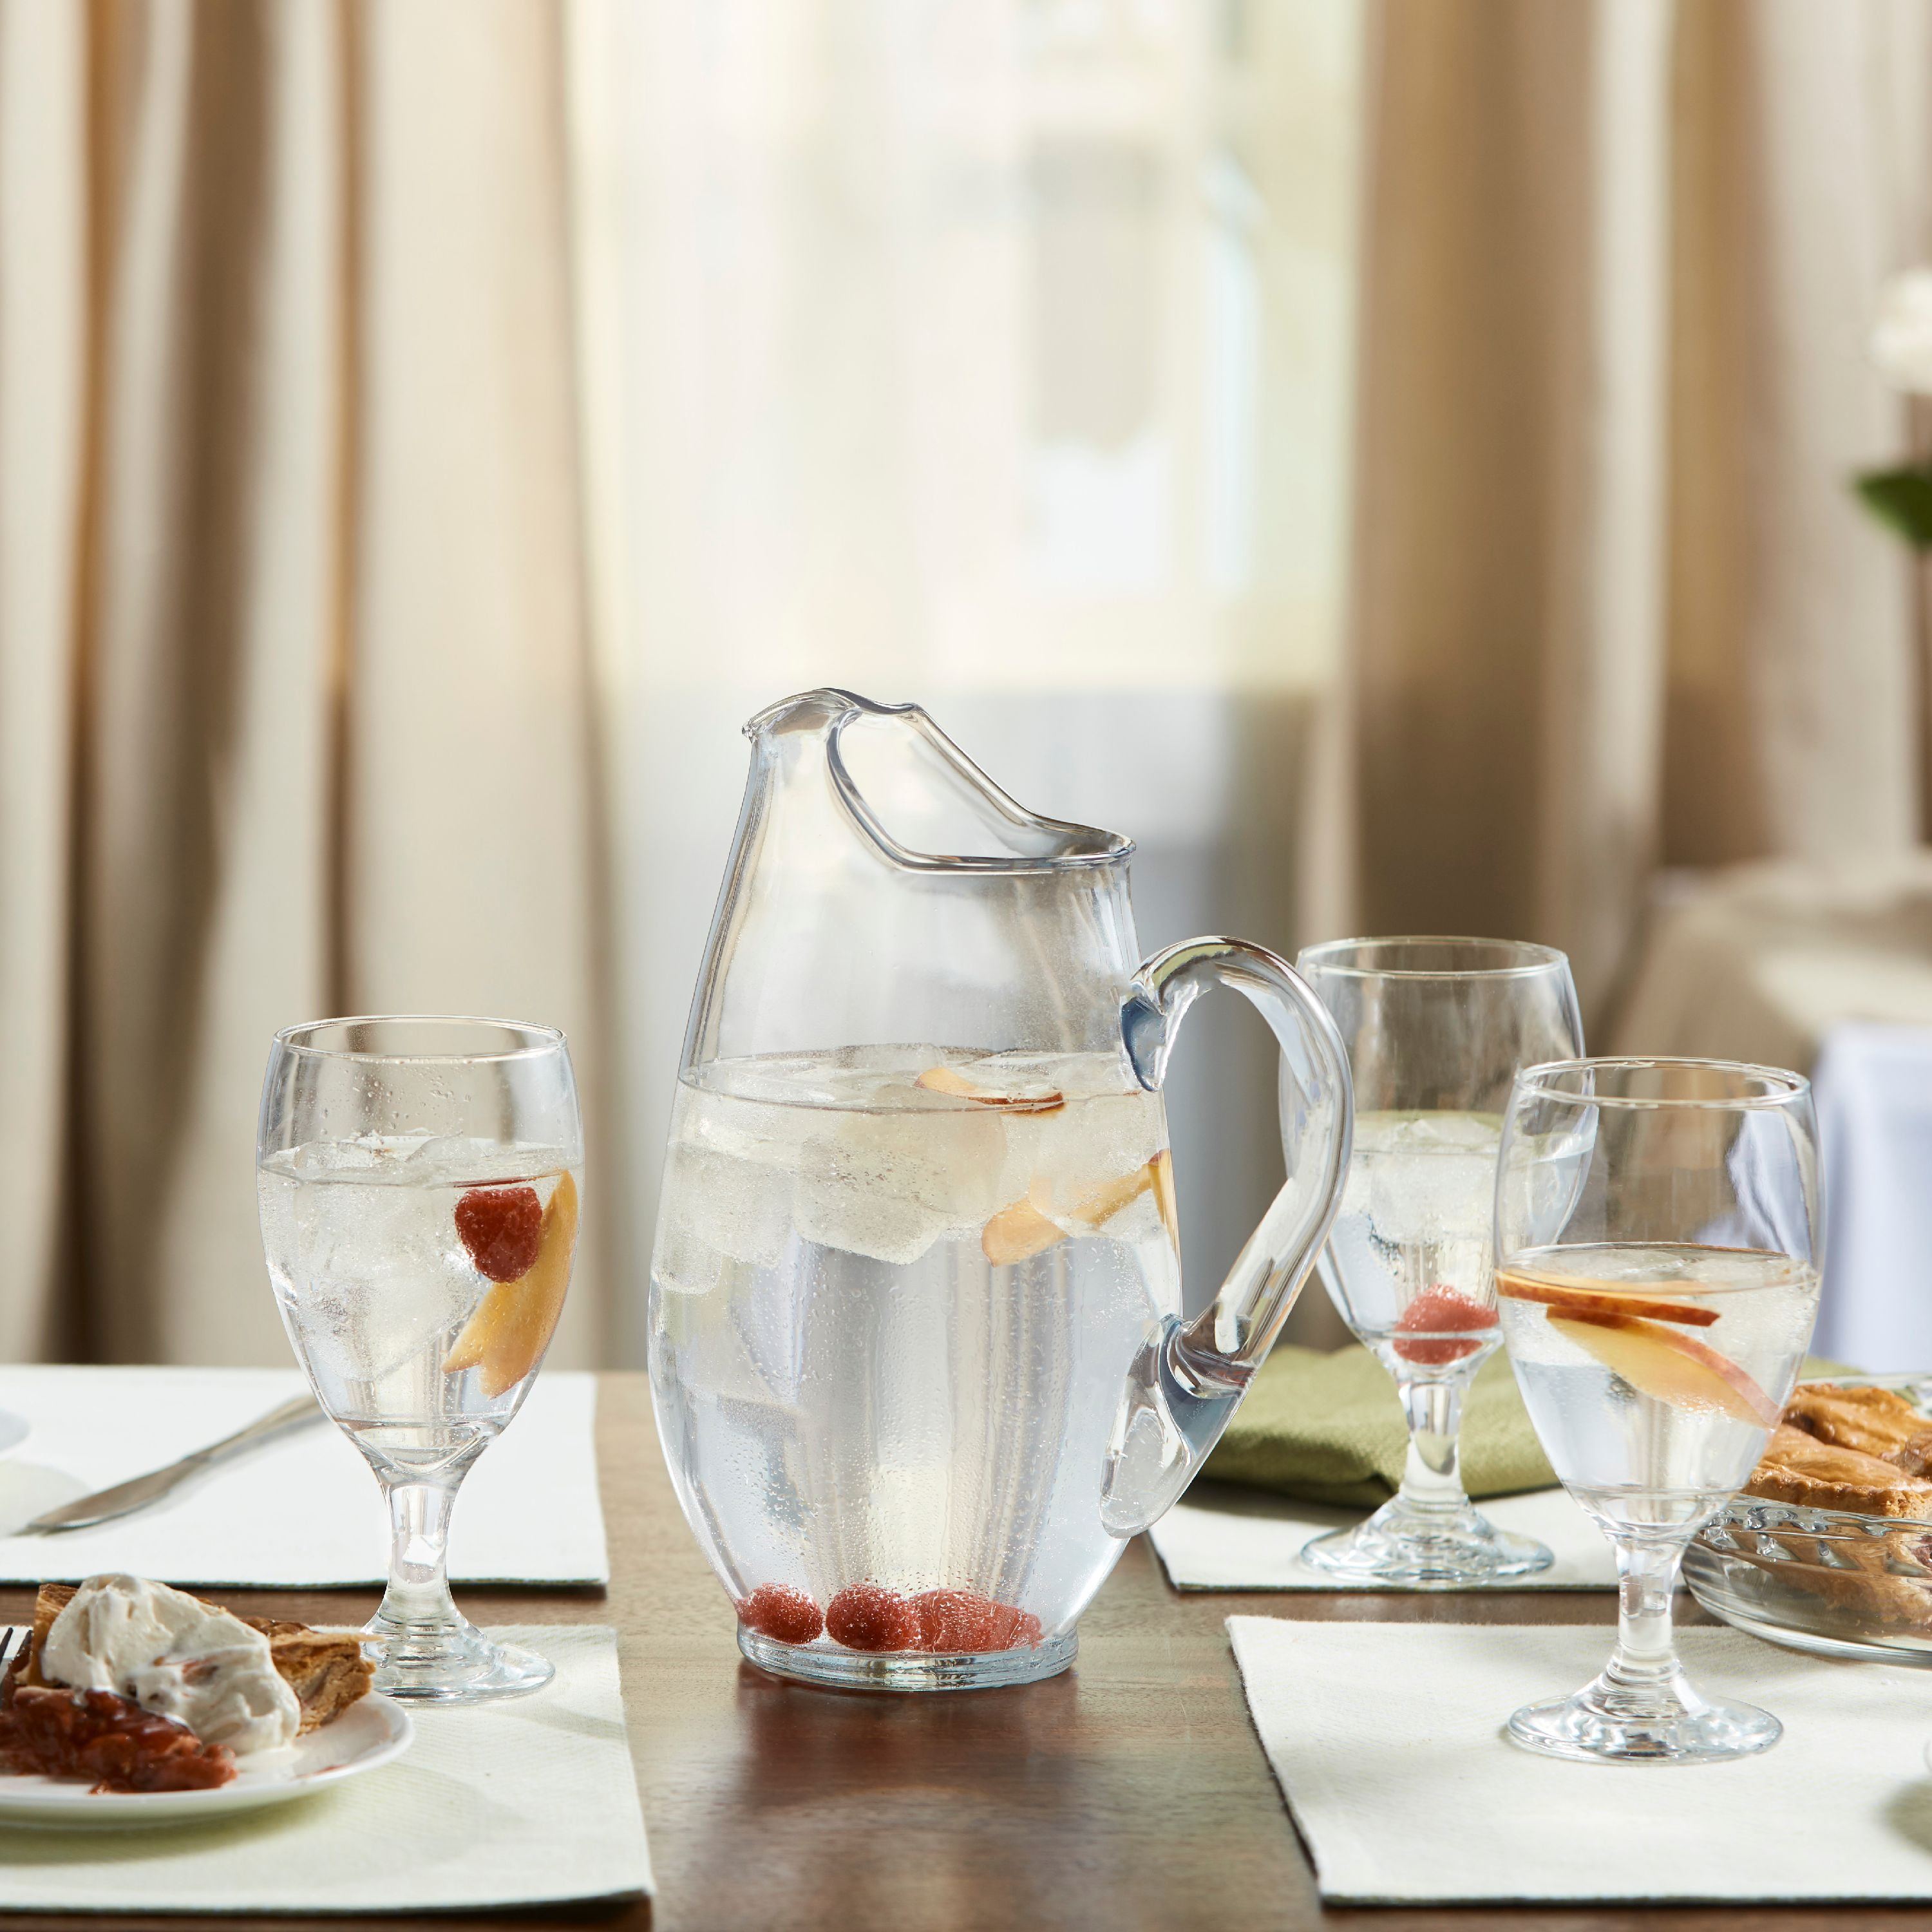 Libbey Glass Pitcher and Tumblers, 7-piece set